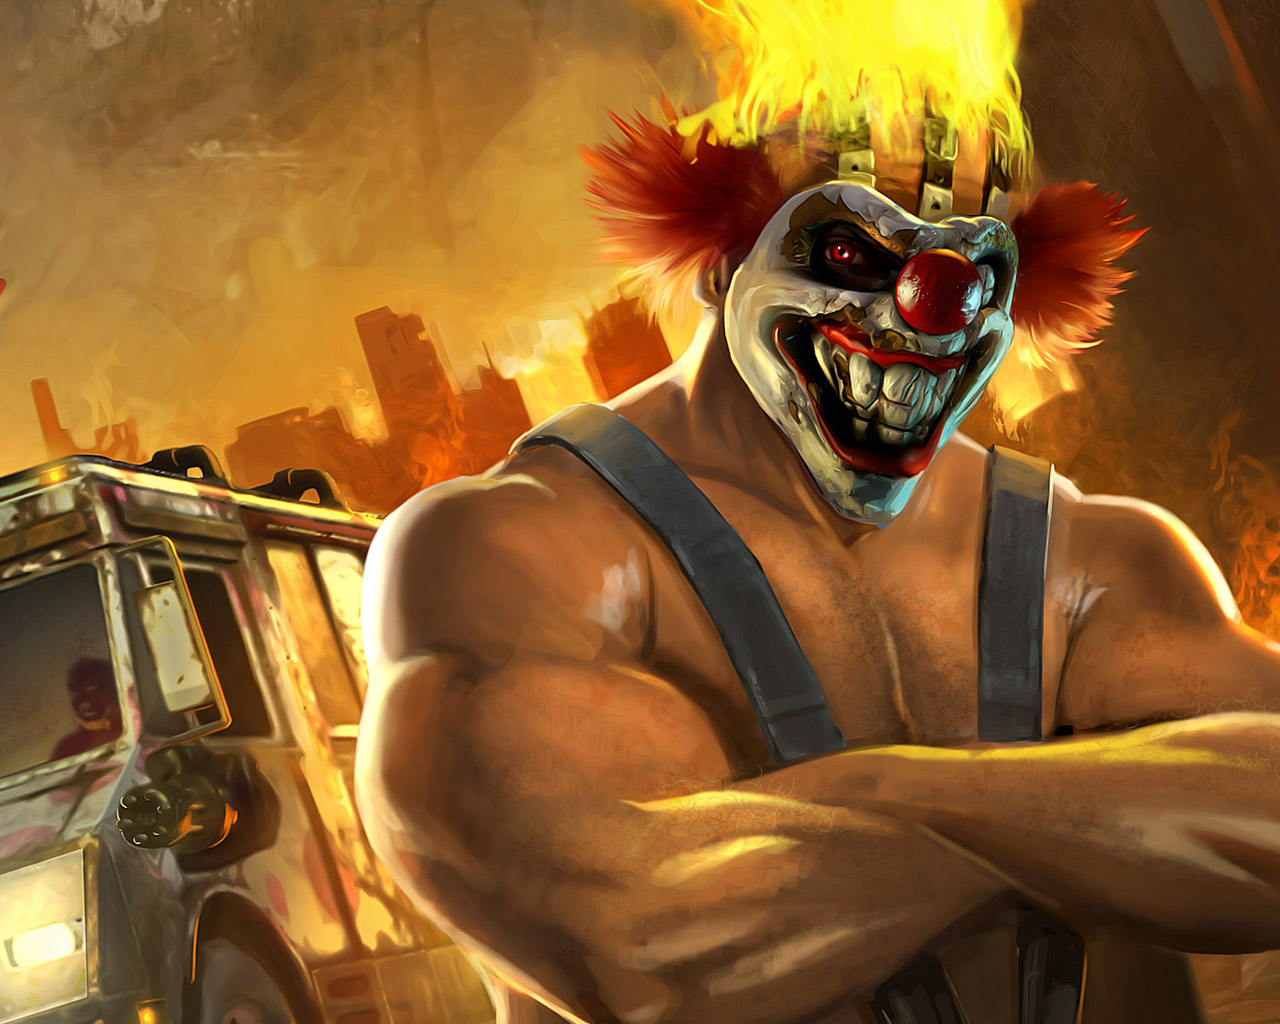 Twisted Metal High Quality Background on Wallpapers Vista